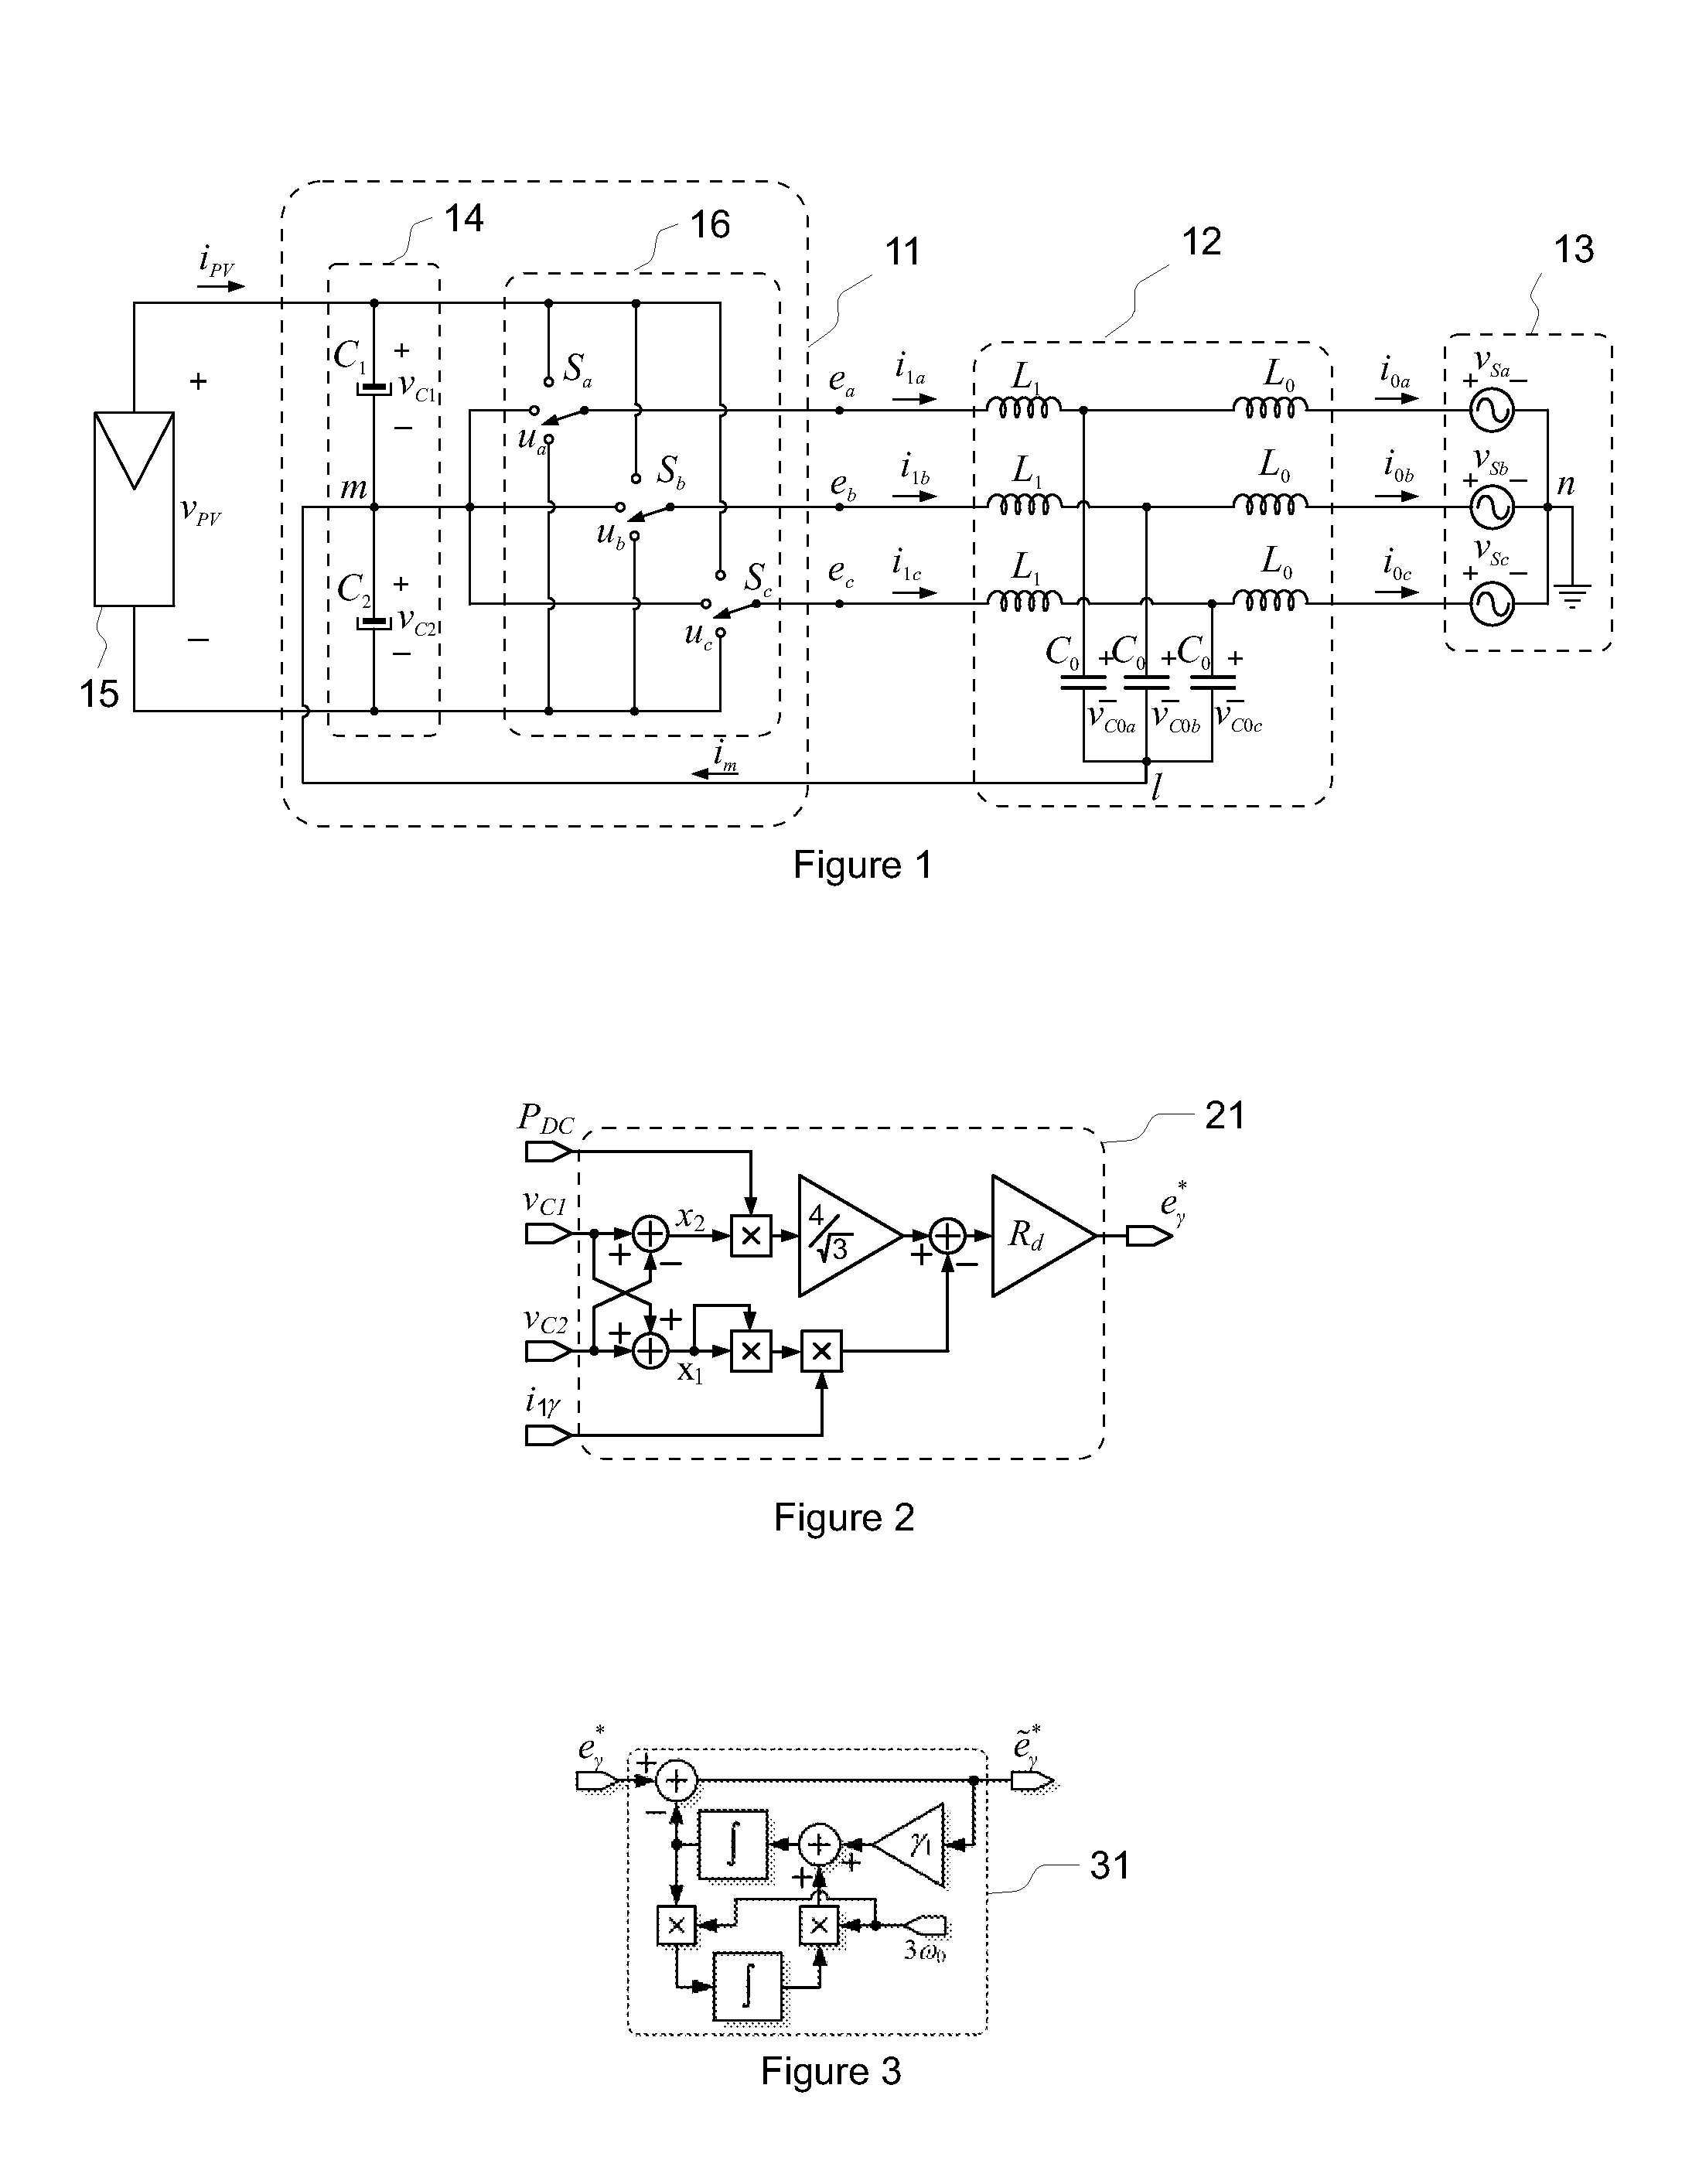 Method and apparatus for zero-sequence damping and voltage balancing